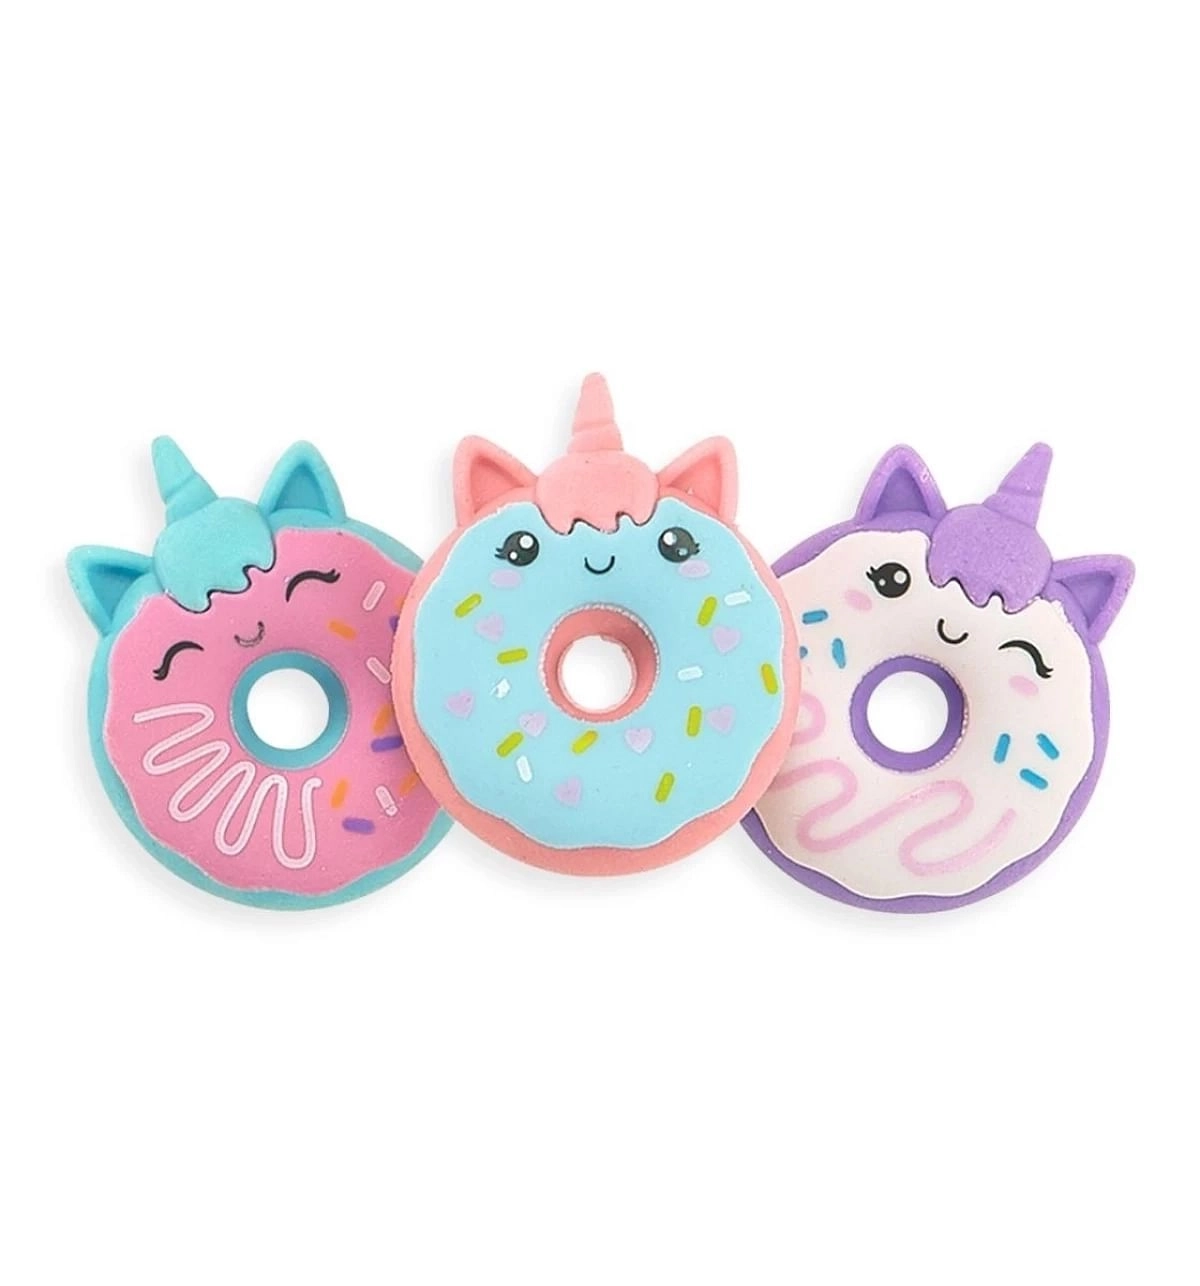 OOLY Magic Bakery Unicorn Donuts Scented Erasers, Erasers for Art, School, and Office Use, Classroom Set, Set of 3, Multicolour, 6Y+